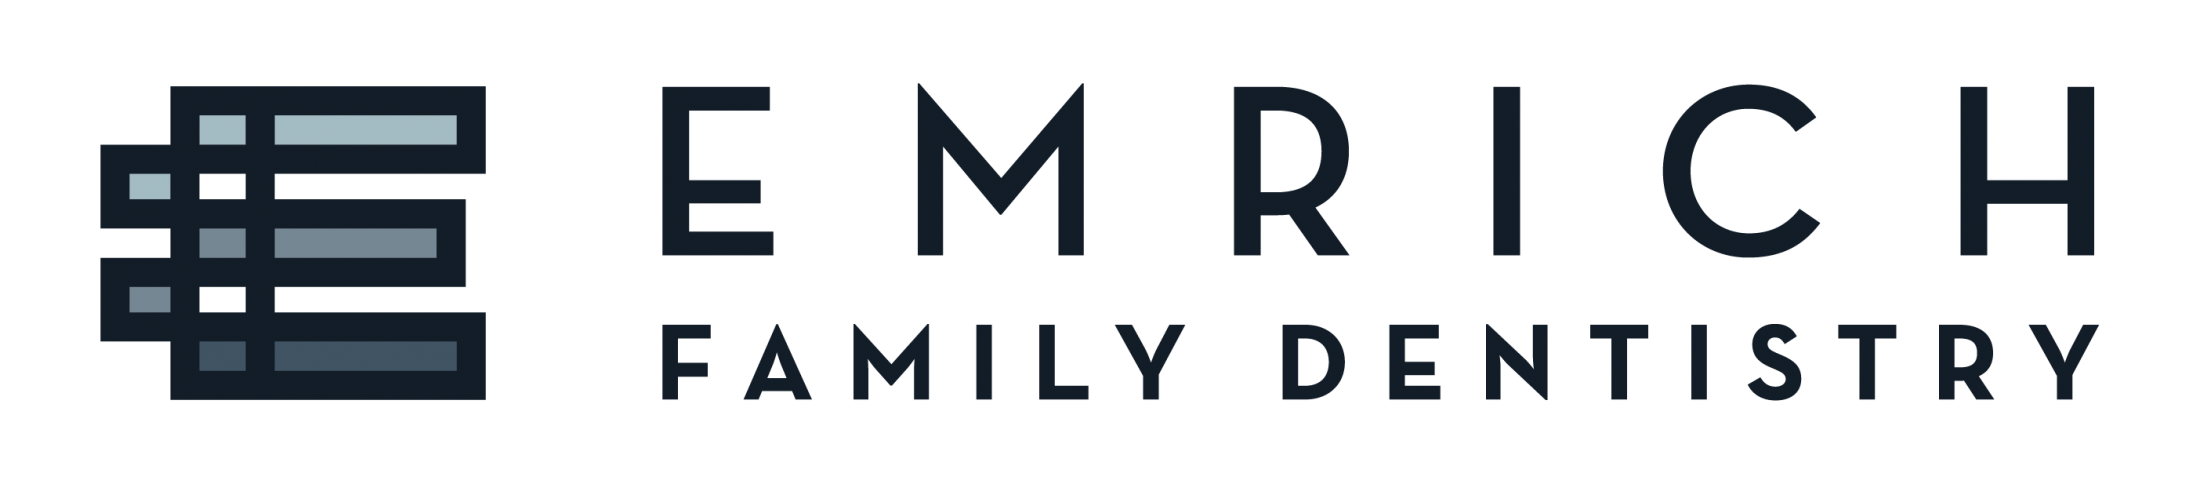 Link to Emrich Family Dentistry home page